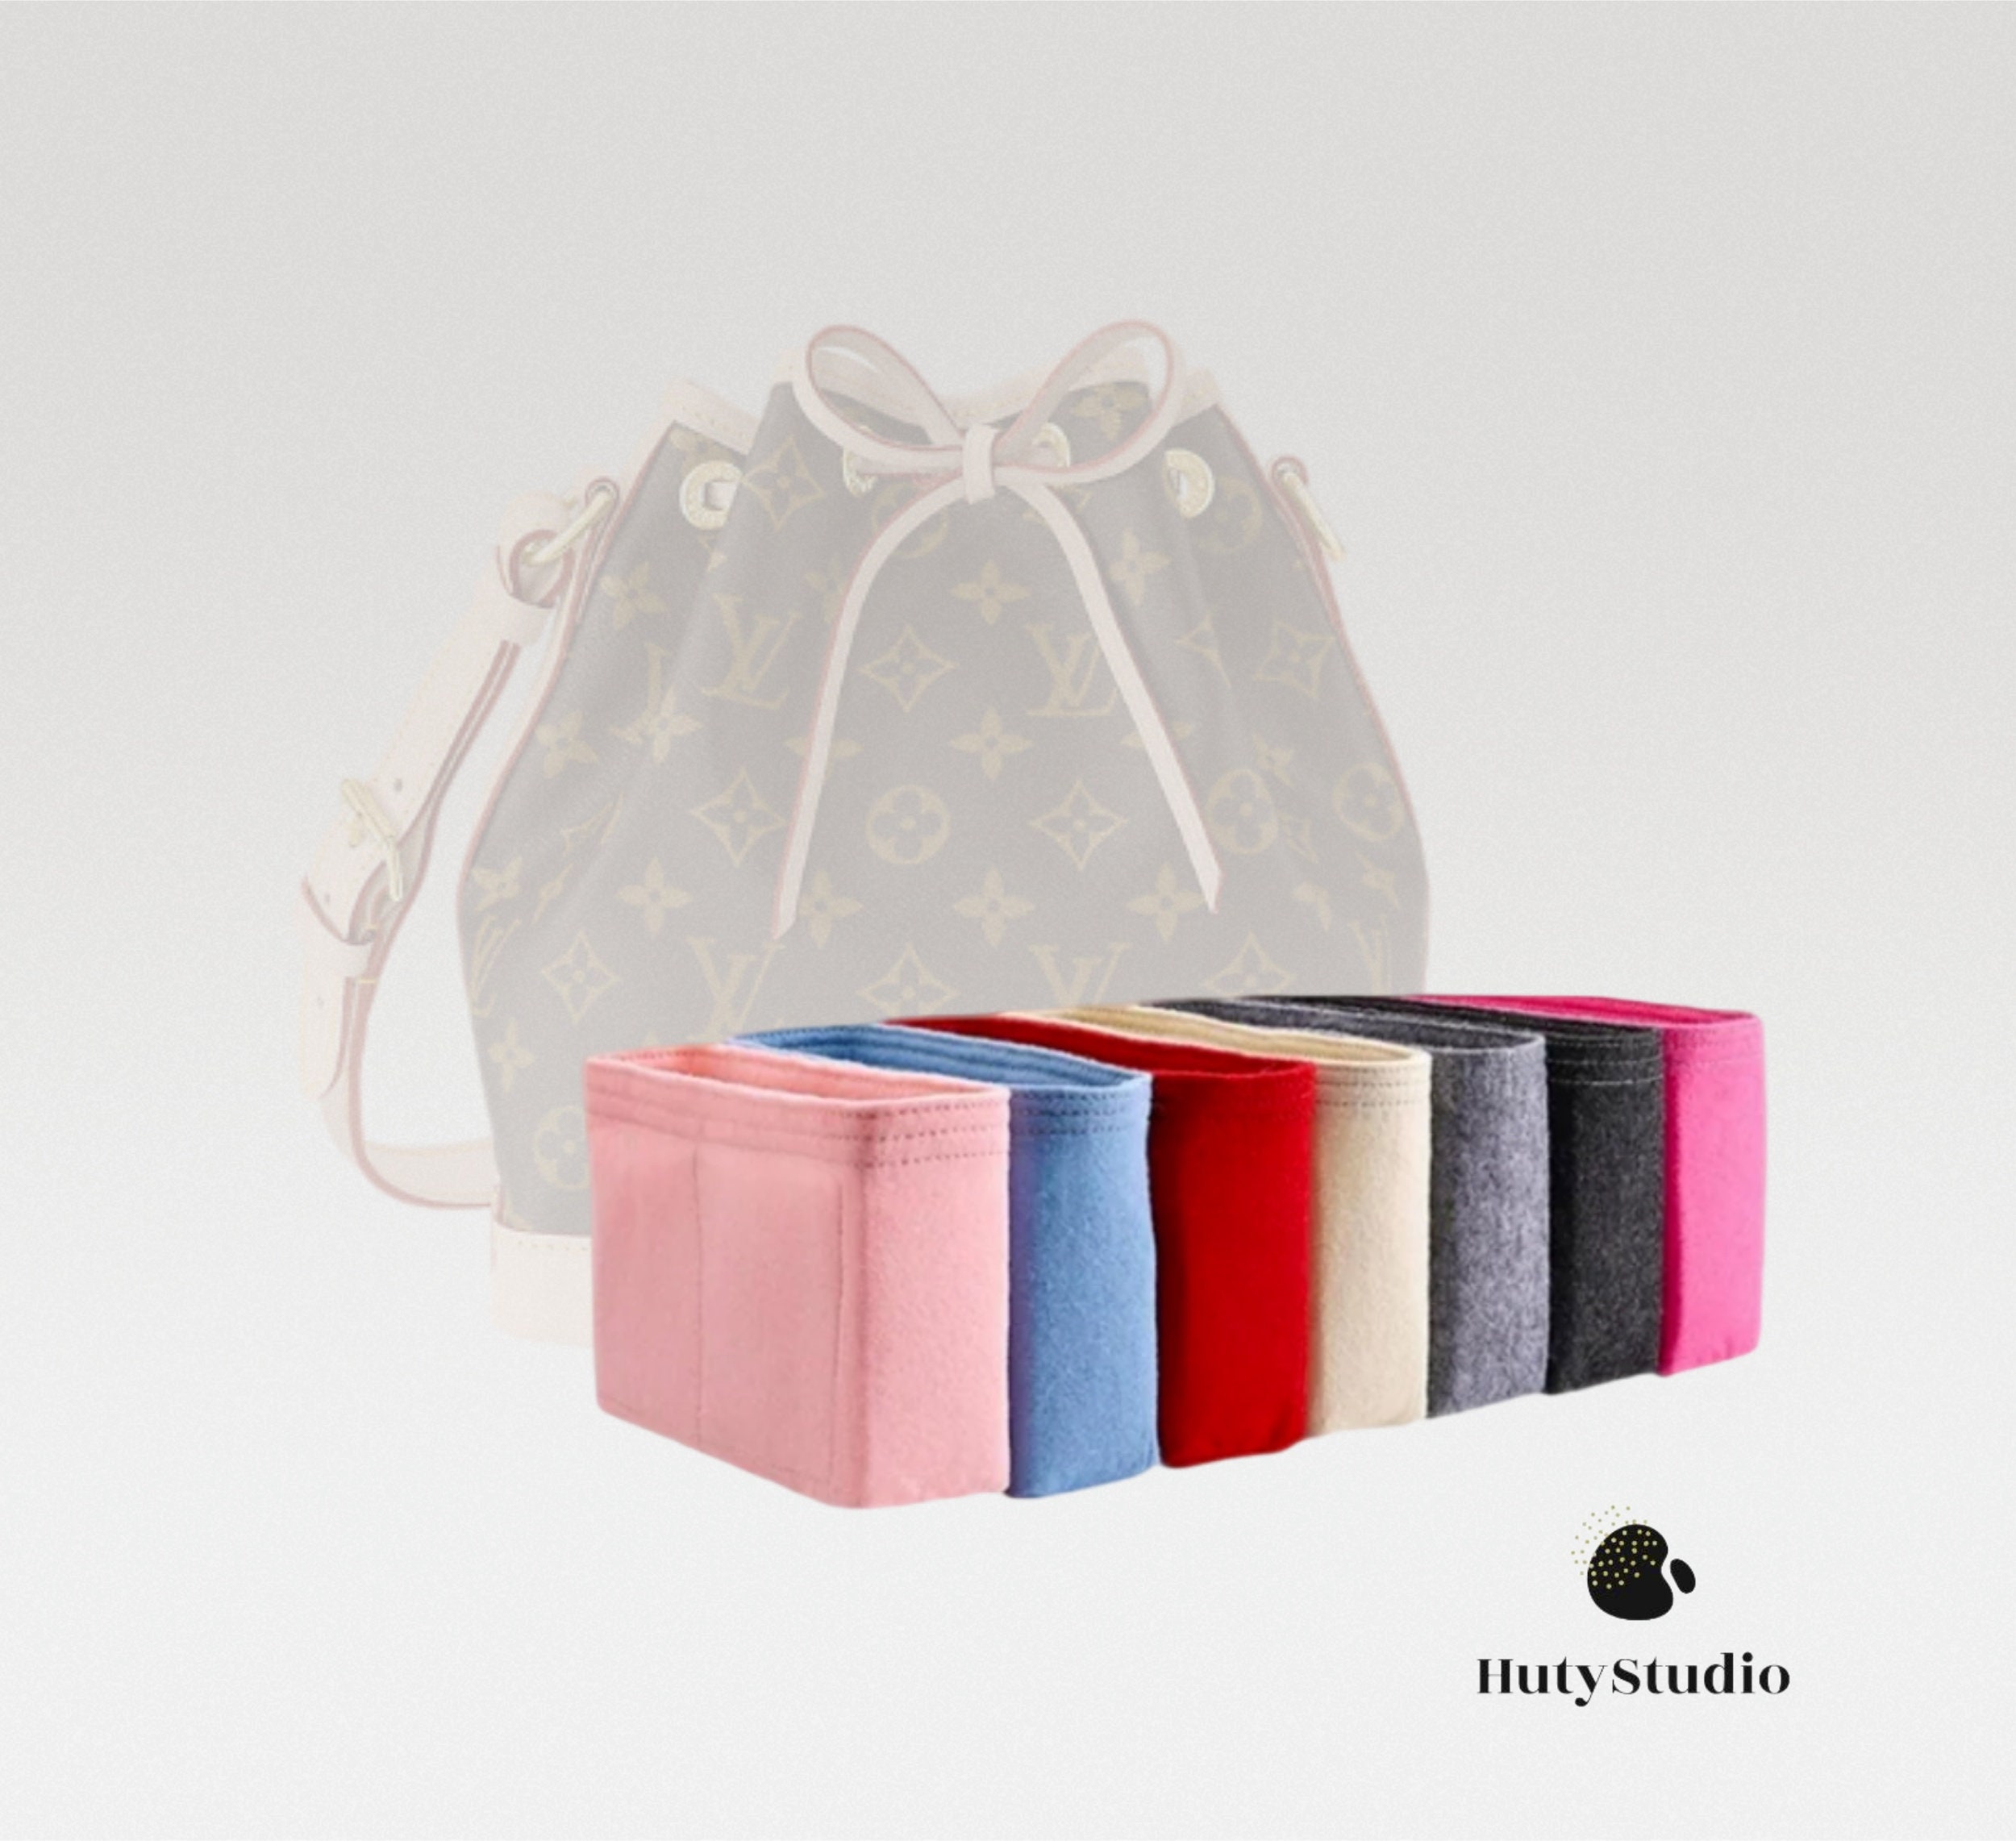 Bag and Purse Organizer with Chamber Style for Louis Vuitton Noe and Petit  Noe Models